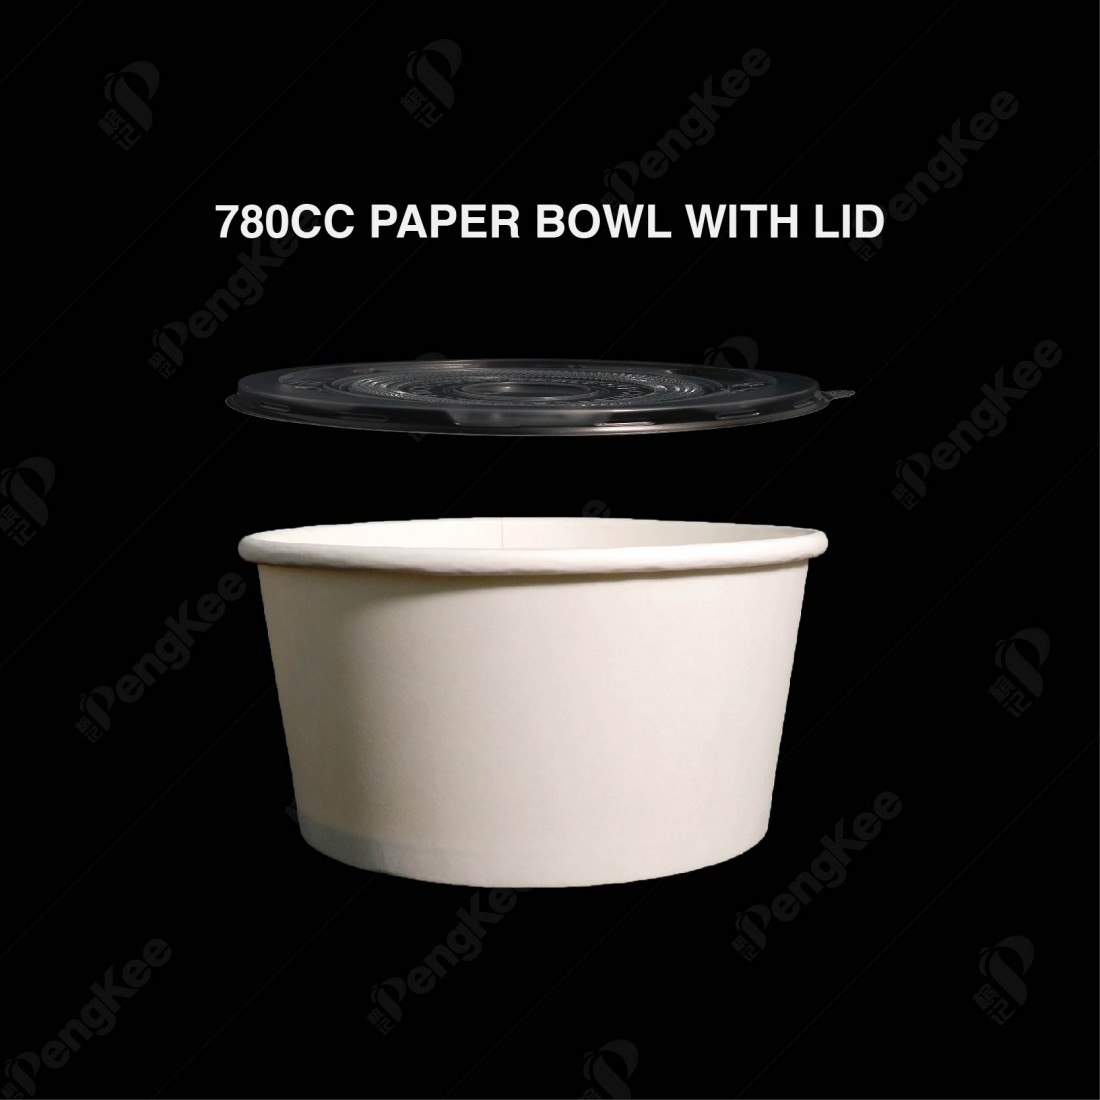 780CC PAPER BOWL + LID (SOLD SEPARATELY)